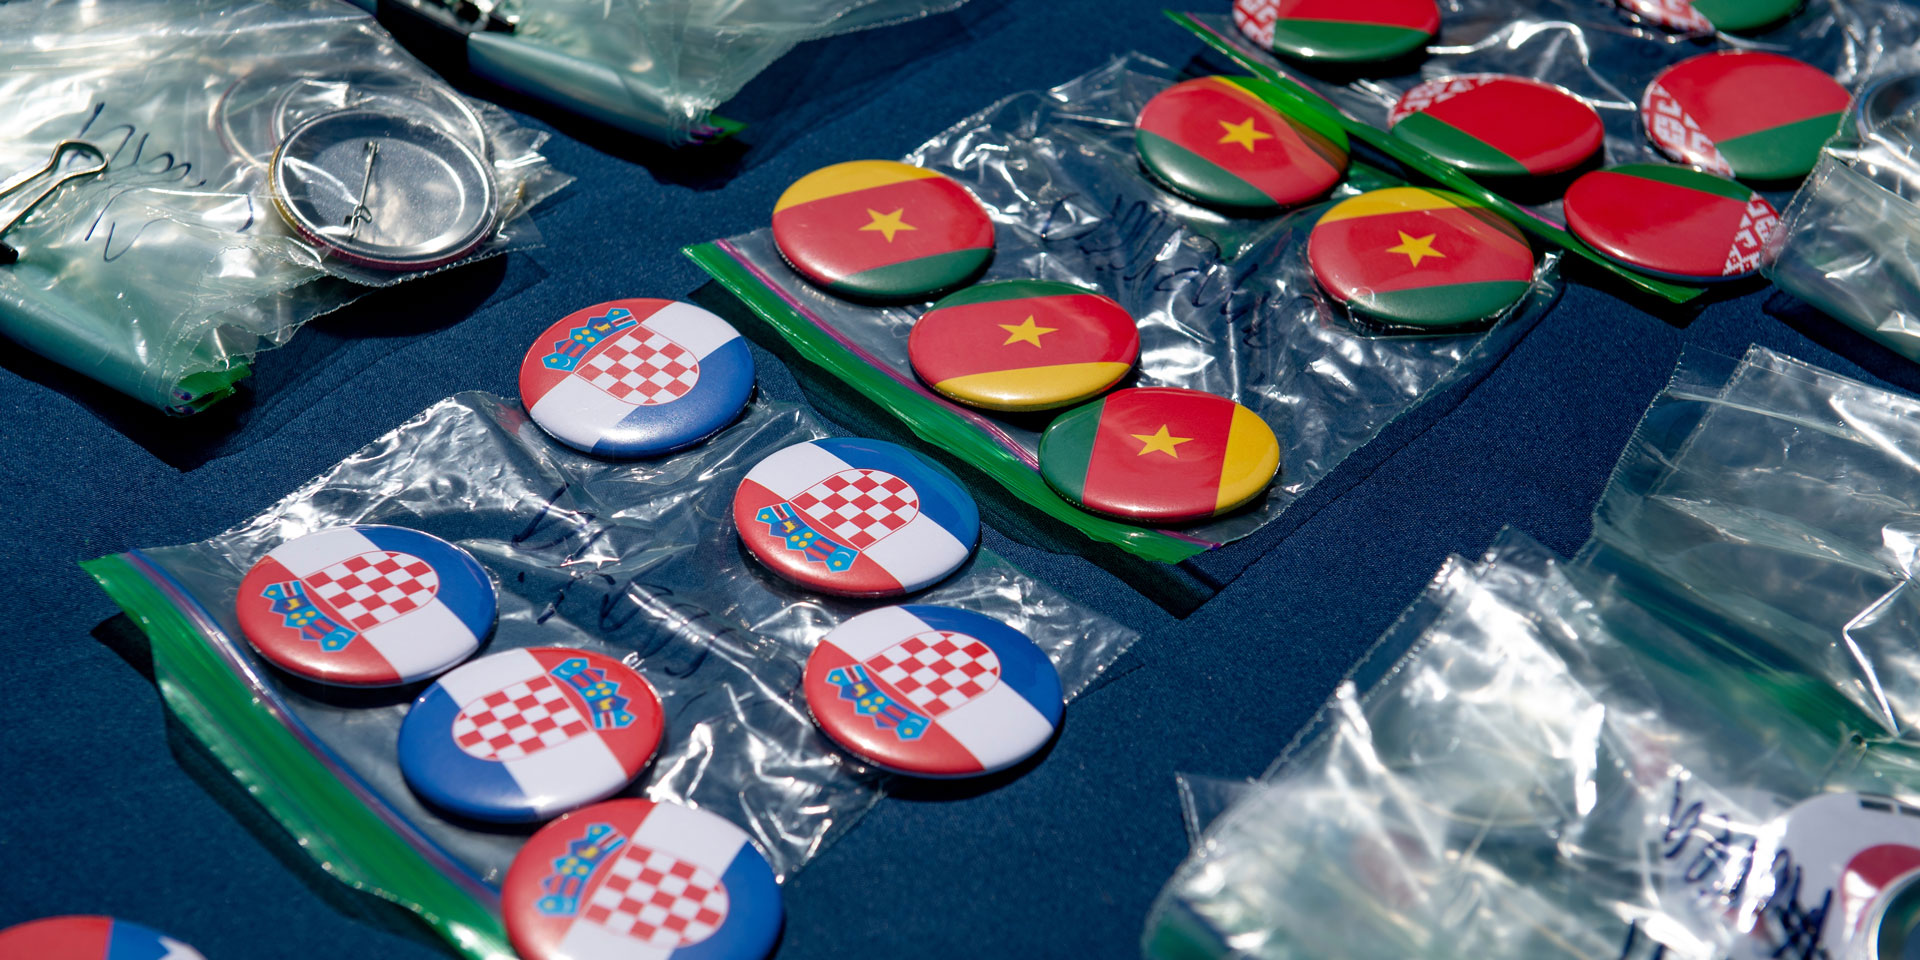 A table of buttons representing flags from countries across the world